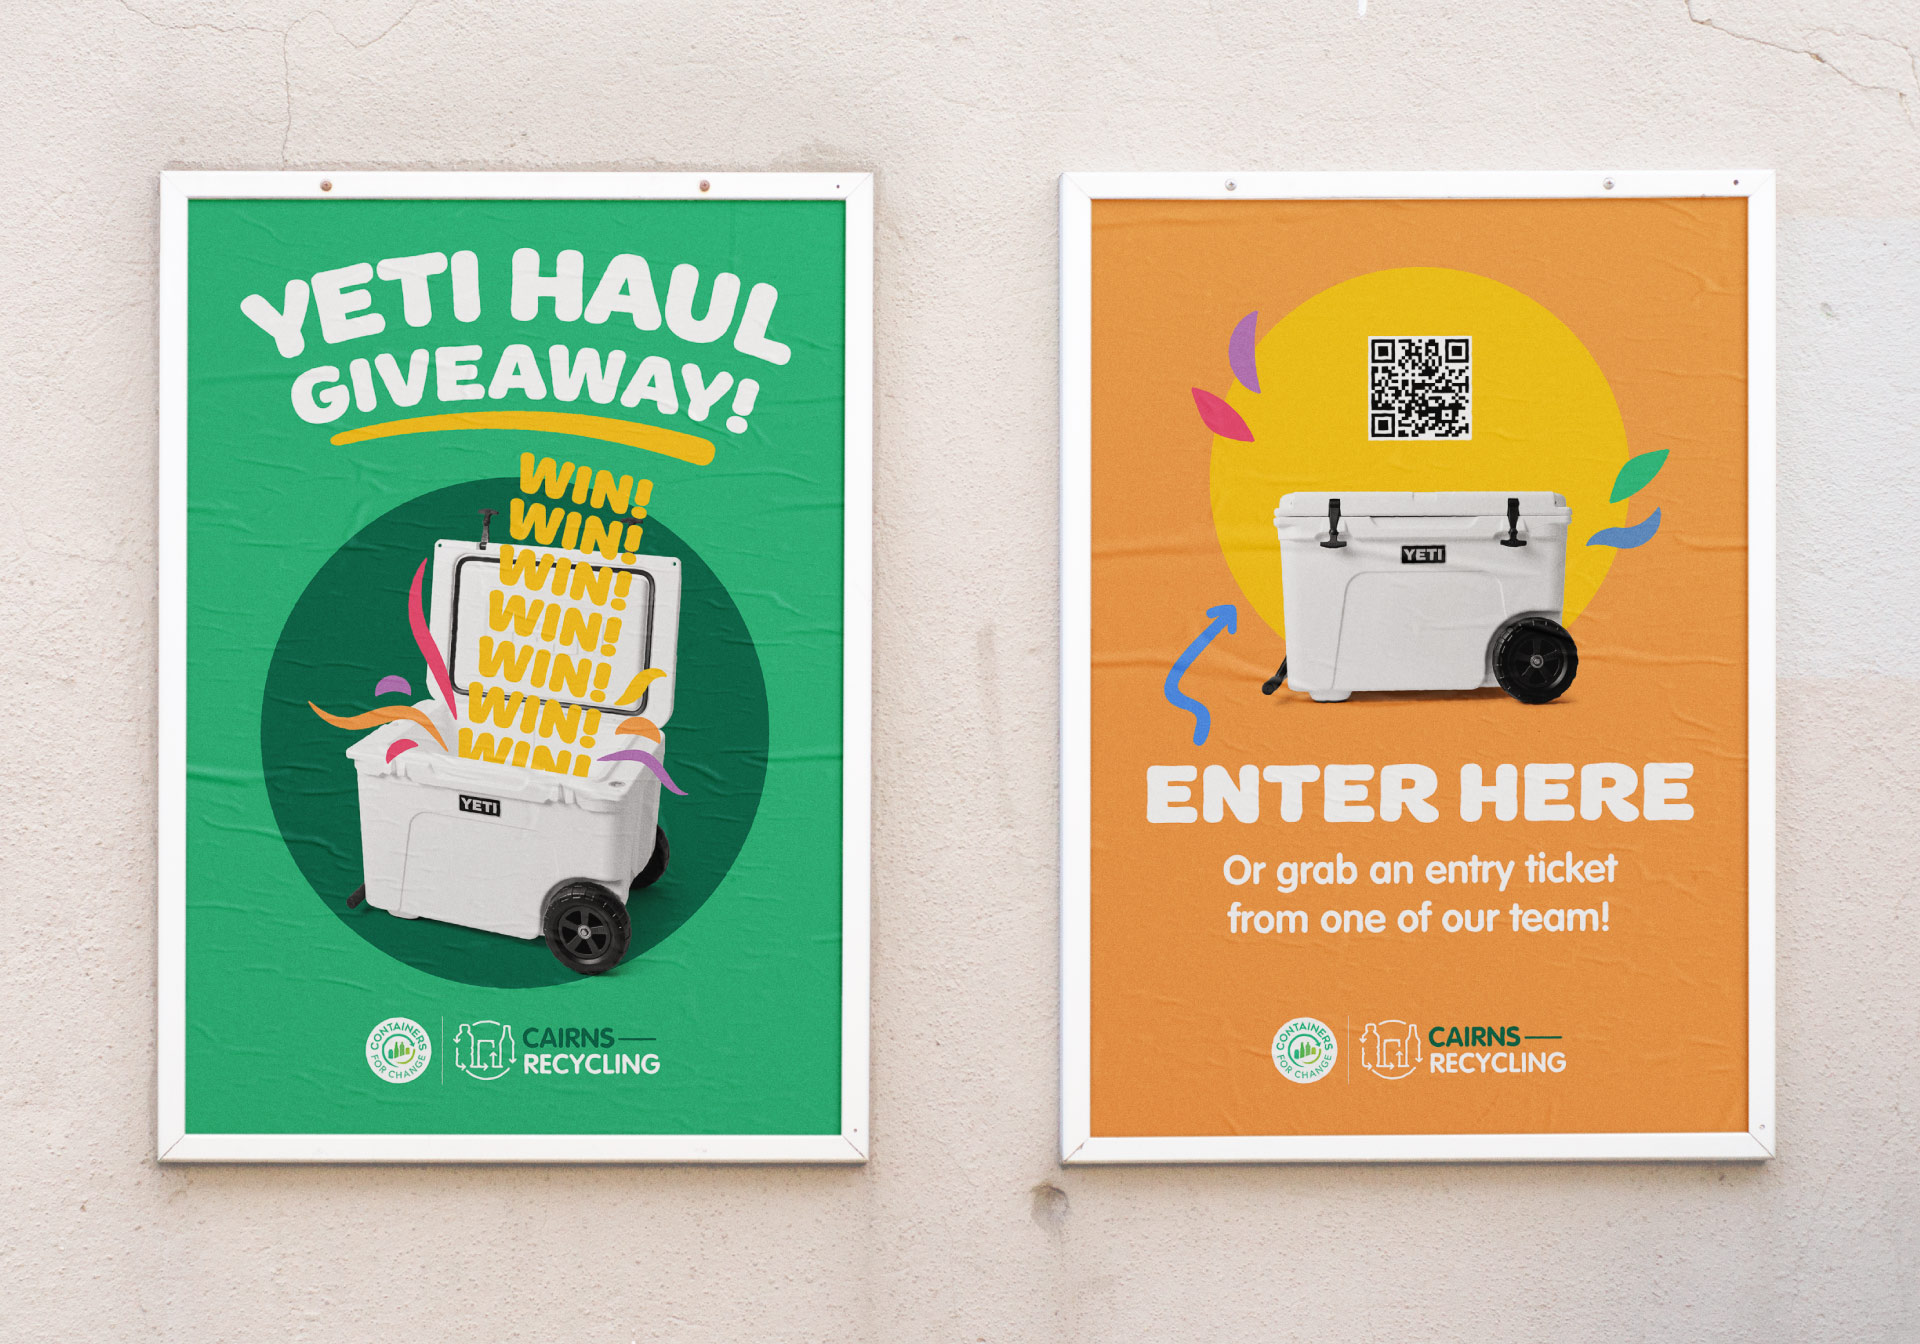 Cairns Recycling Yeti Campaign Competition posters